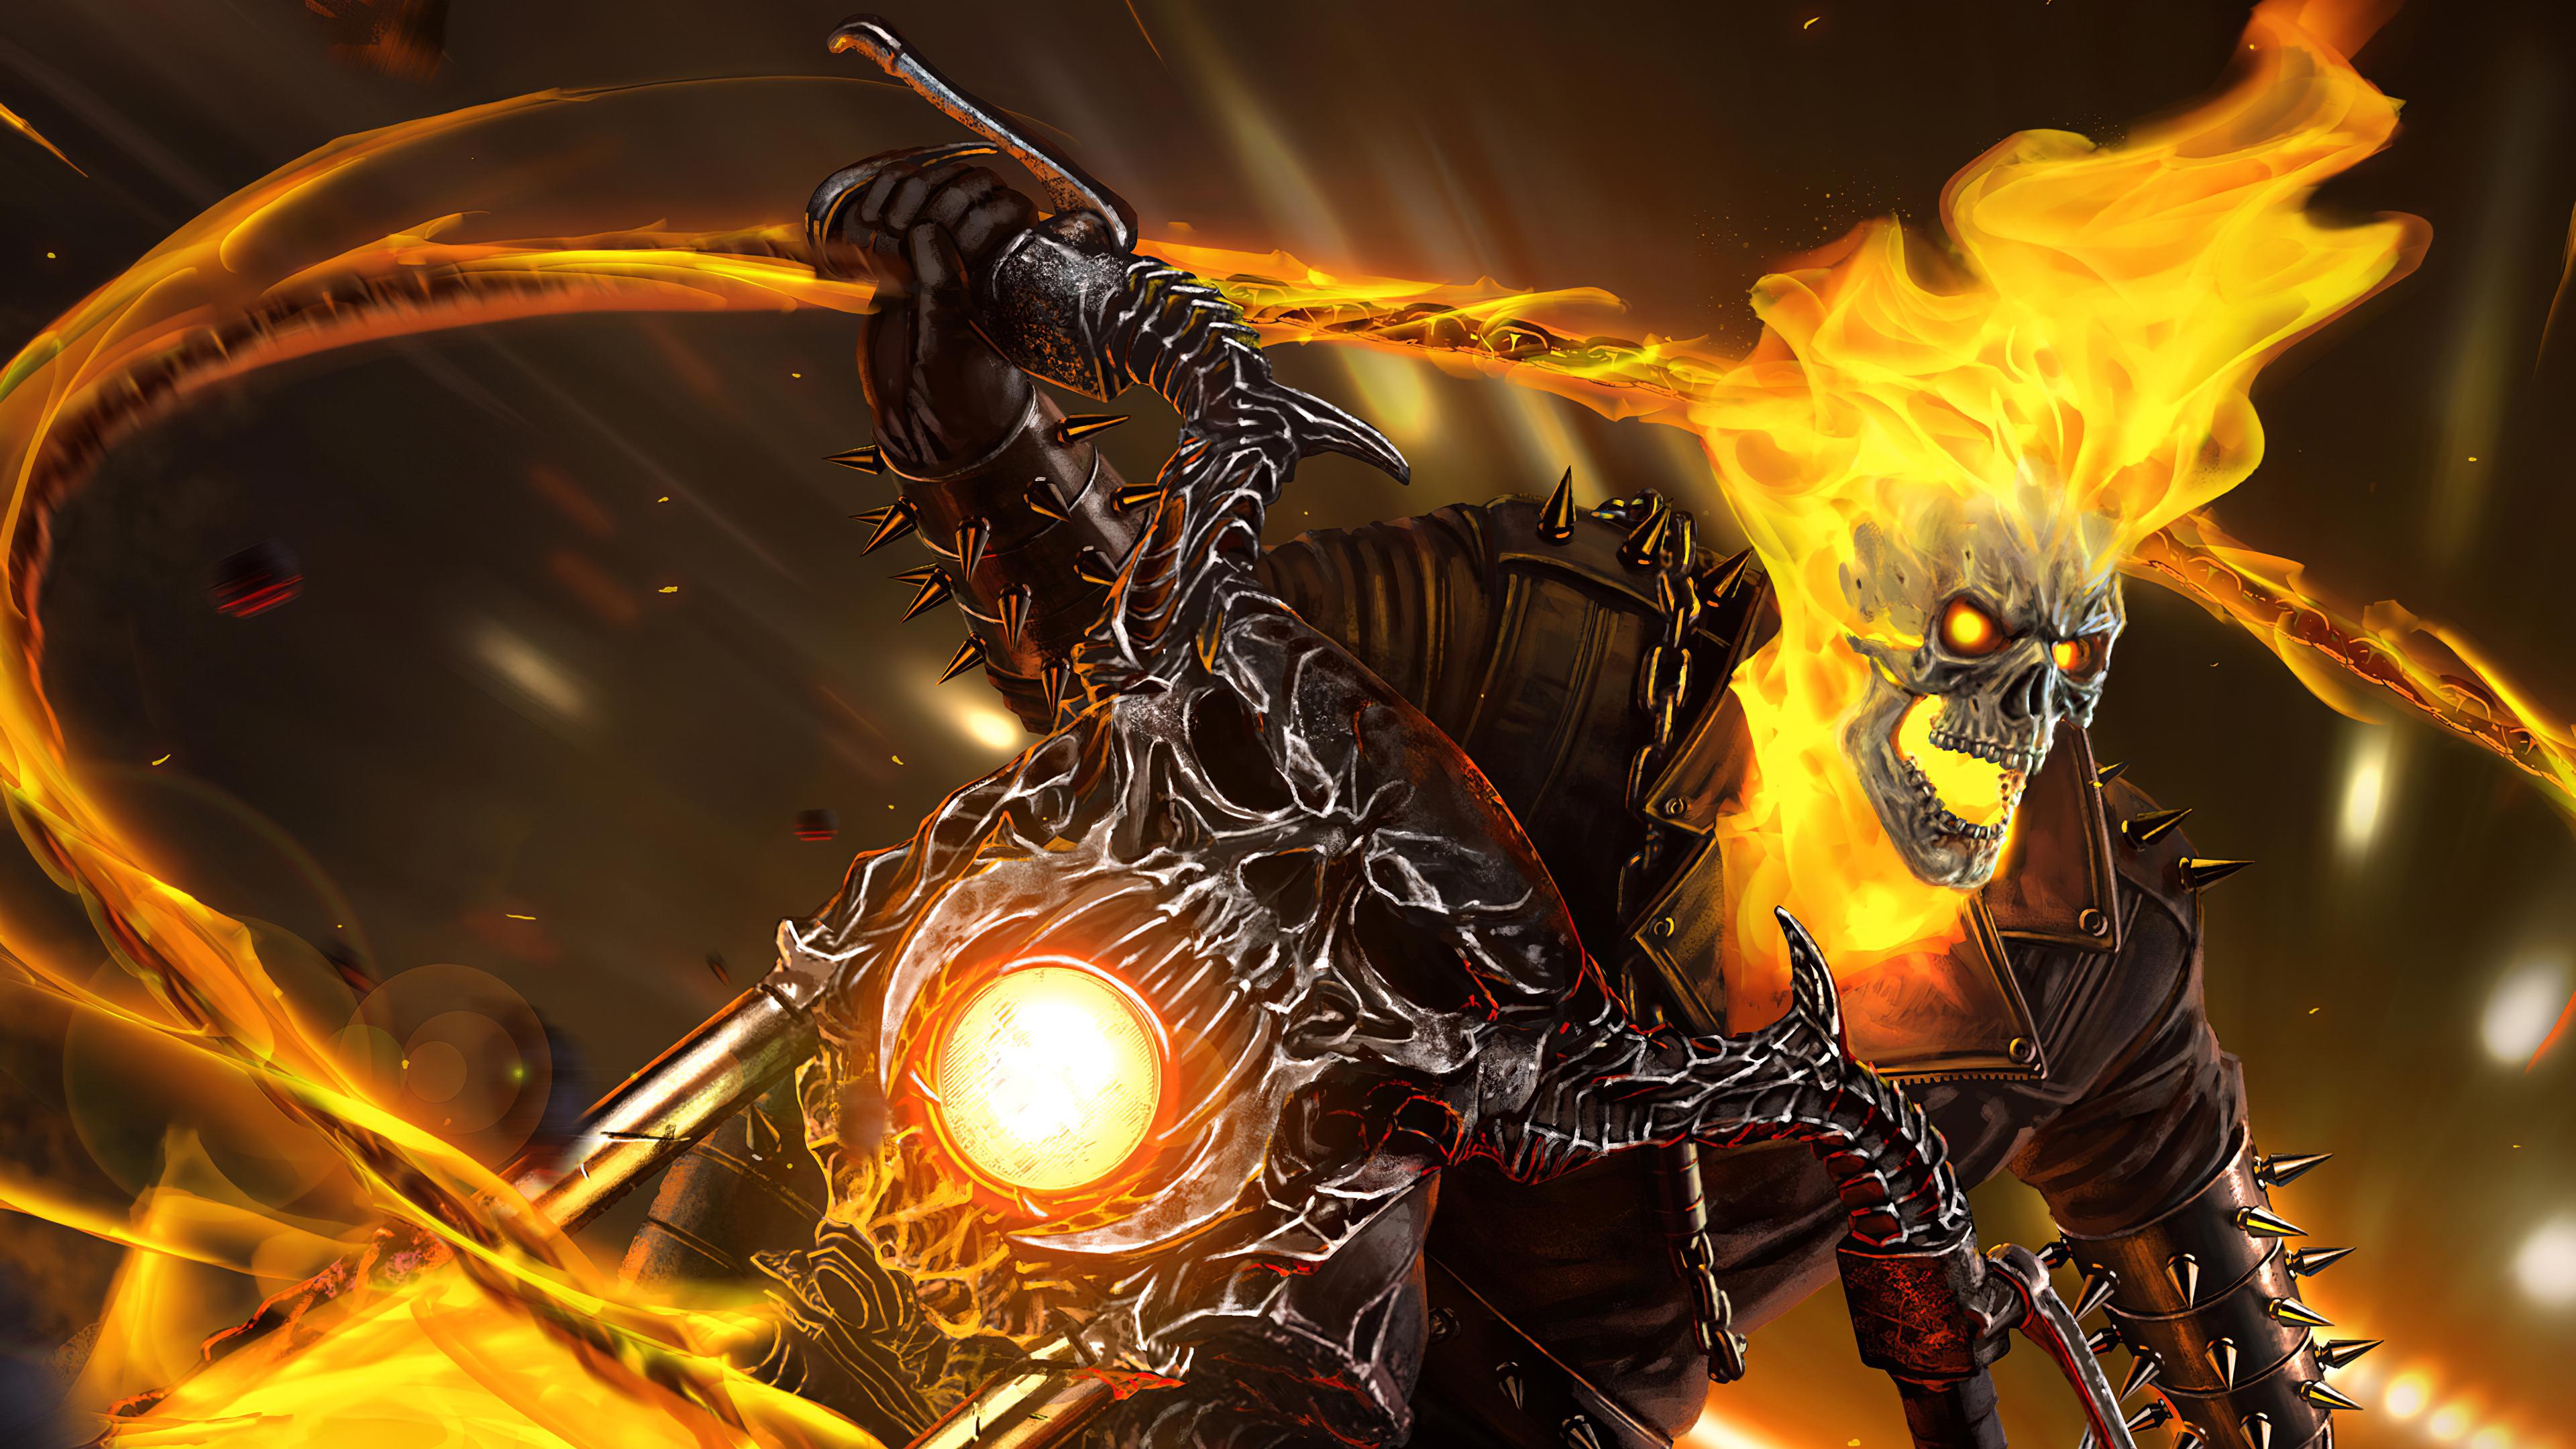 3840 x 2160 · jpeg - 3840x2160 The Ghost Rider 4k 4k HD 4k Wallpapers, Images, Backgrounds ...